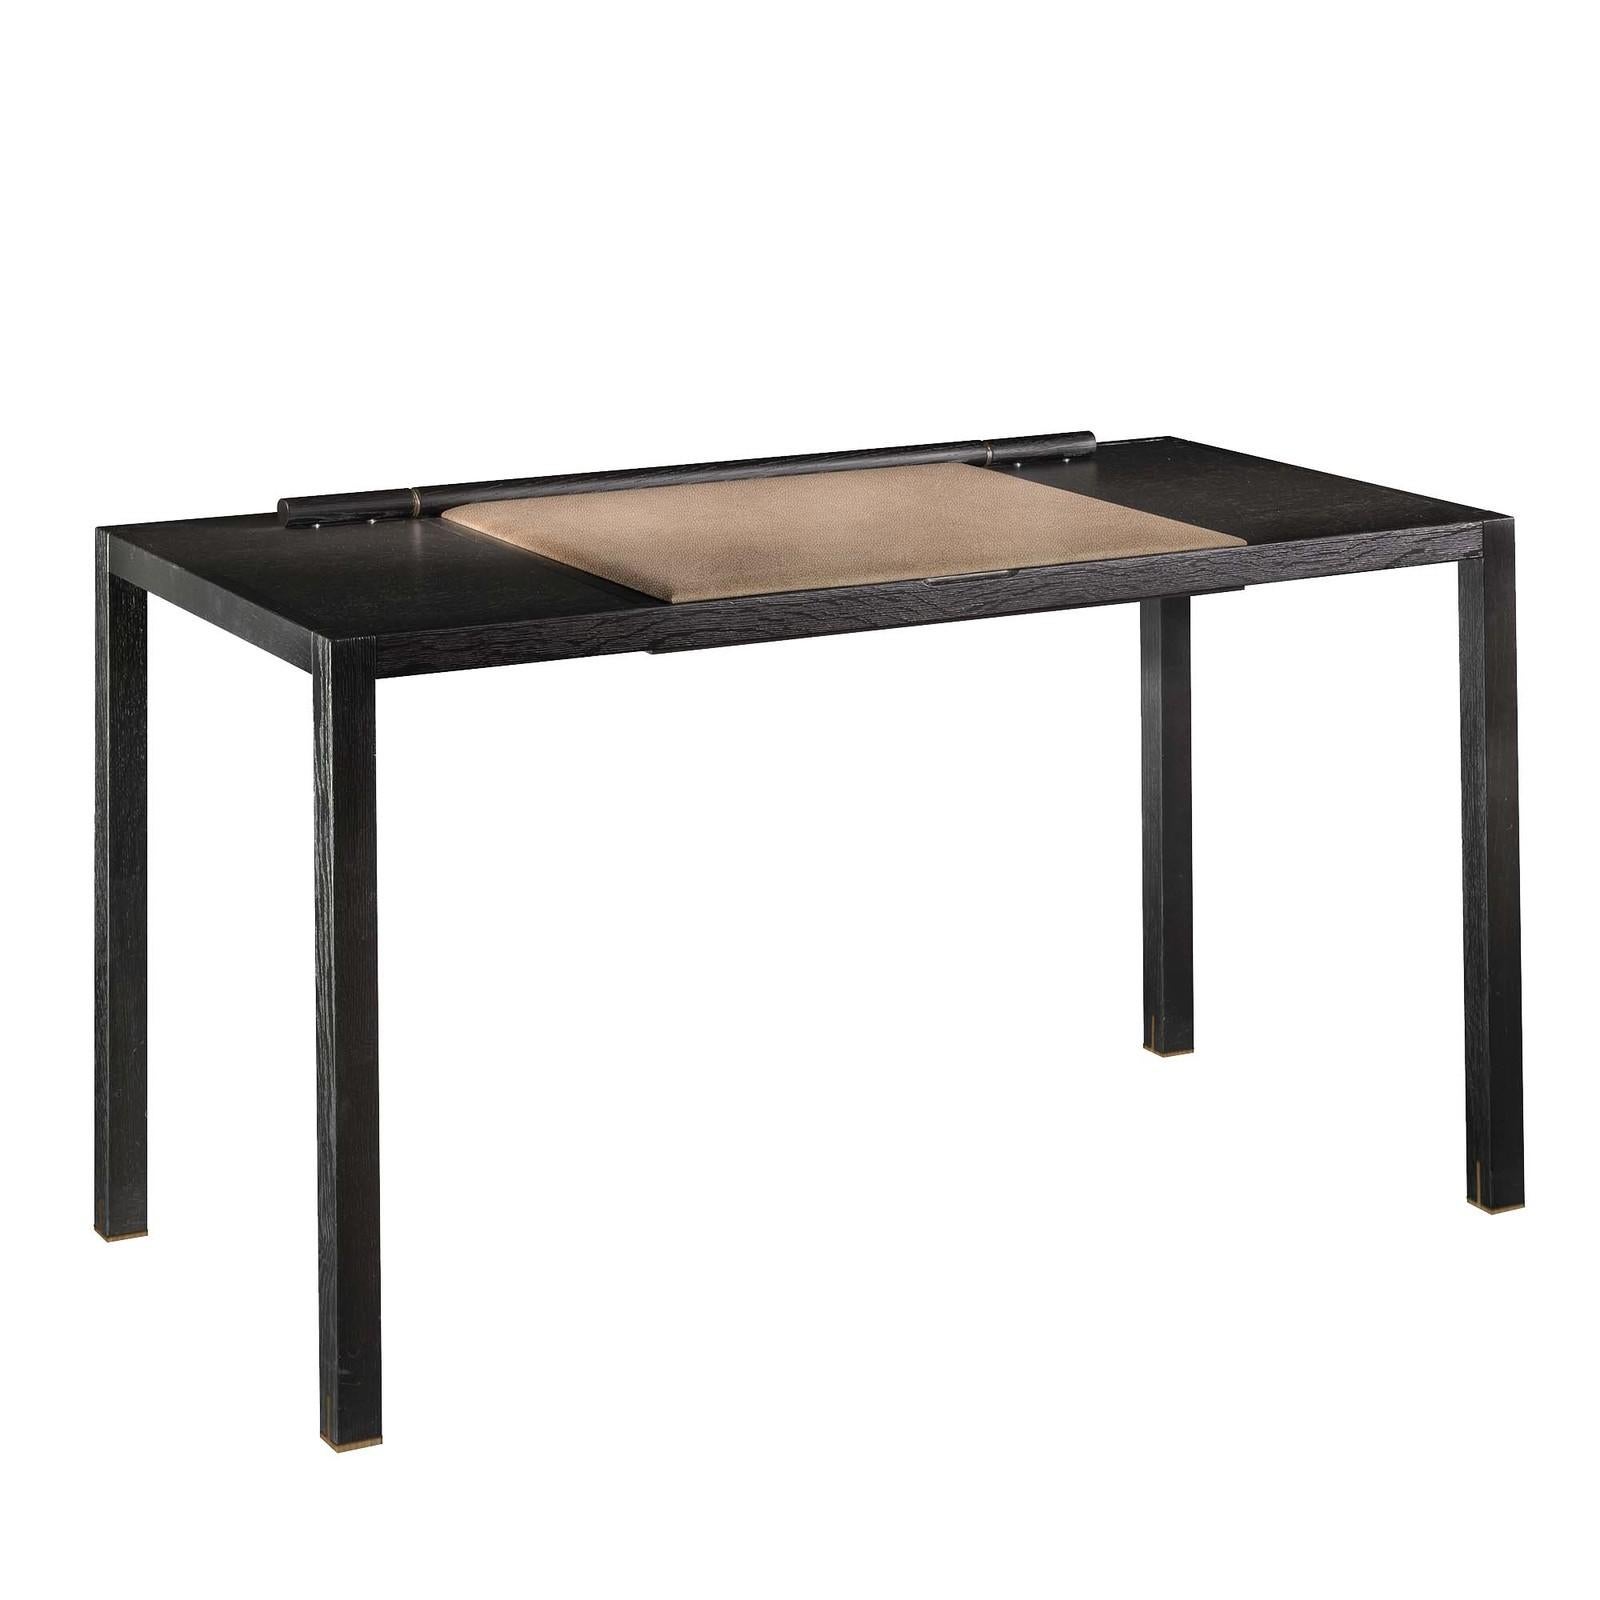 Inspired by 1950s Italian design, this sleek desk will add a stylish flair to any space with its matte black stained oak frame raised on four straight legs. The desktop features a flip blotter made of tanned leather (also available in stained cork),